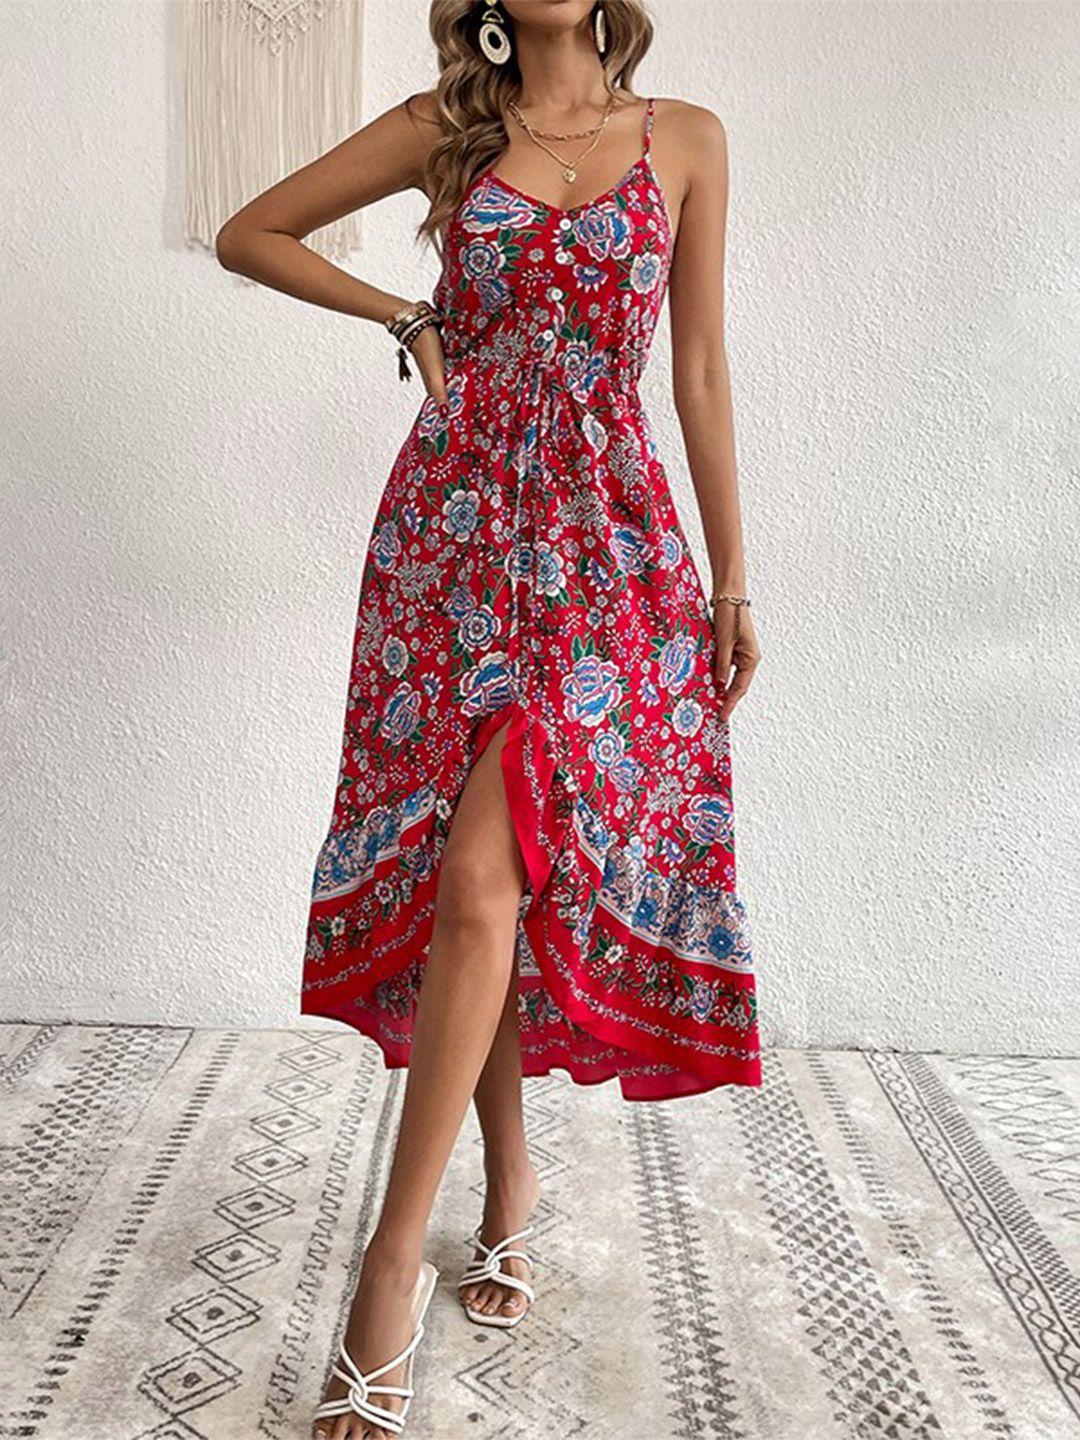 stylecast red floral printed shoulder straps sleeveless fit & flare midi dress